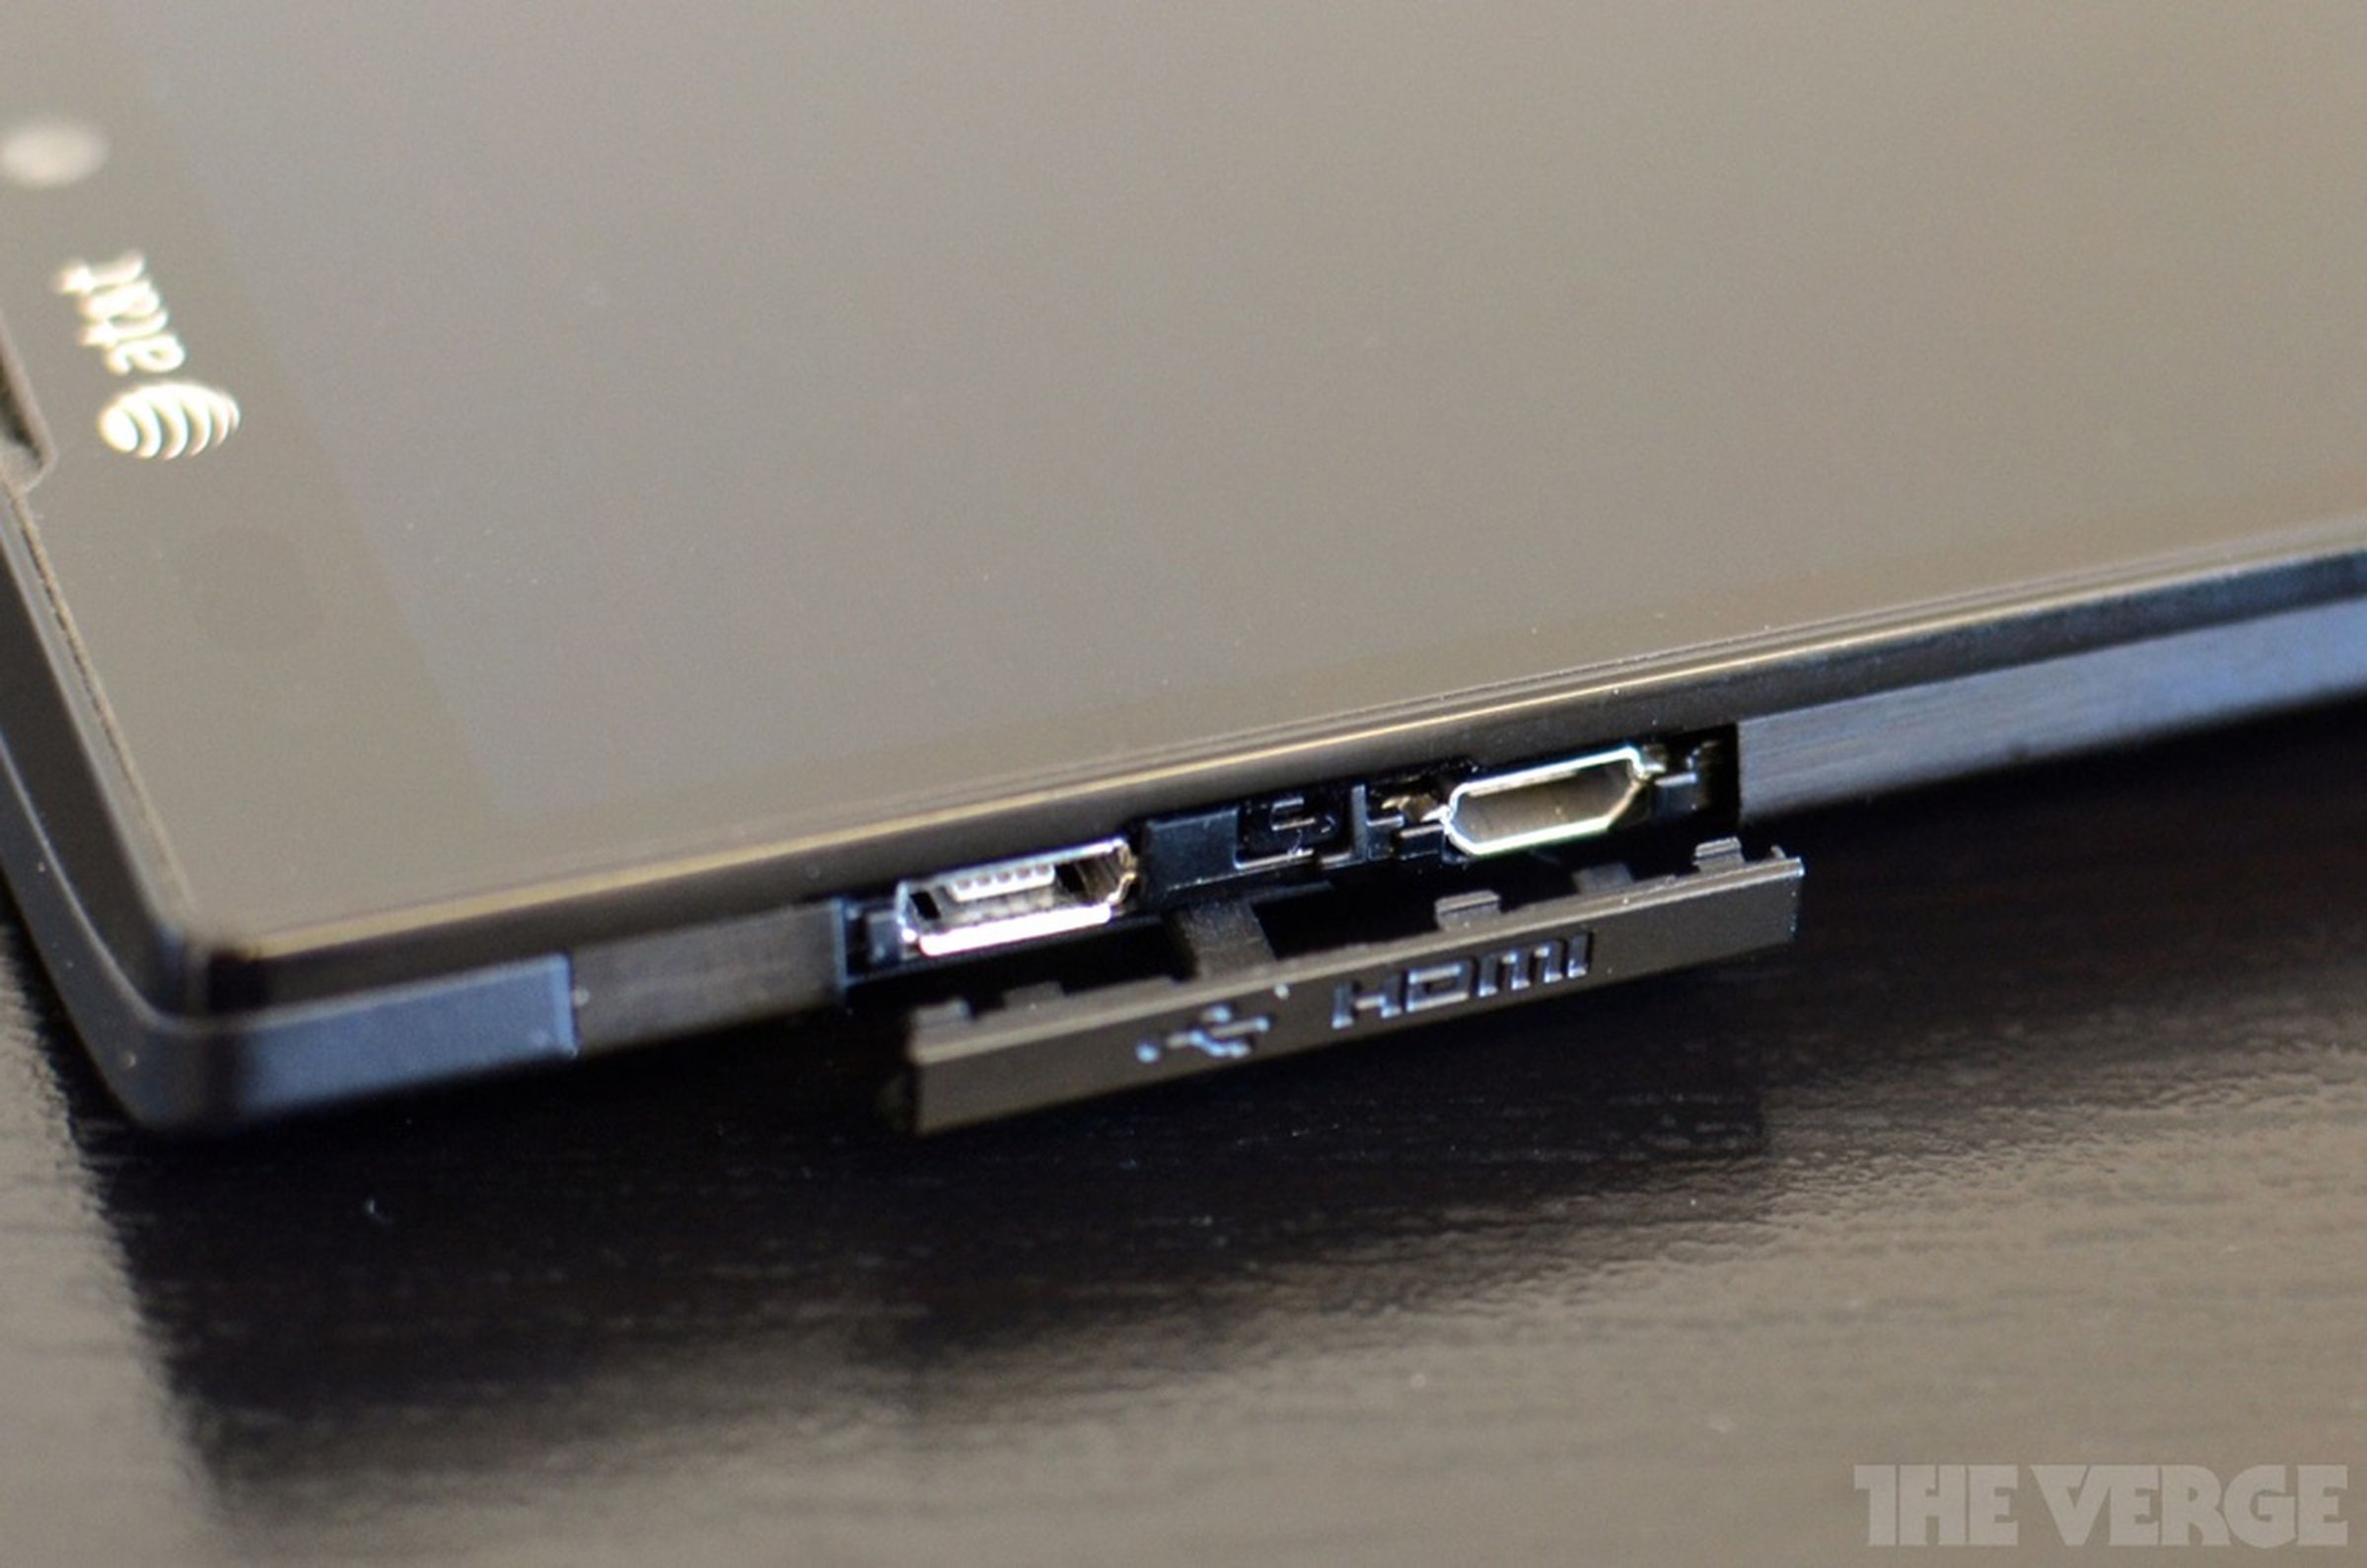 Sony Xperia ion review photos